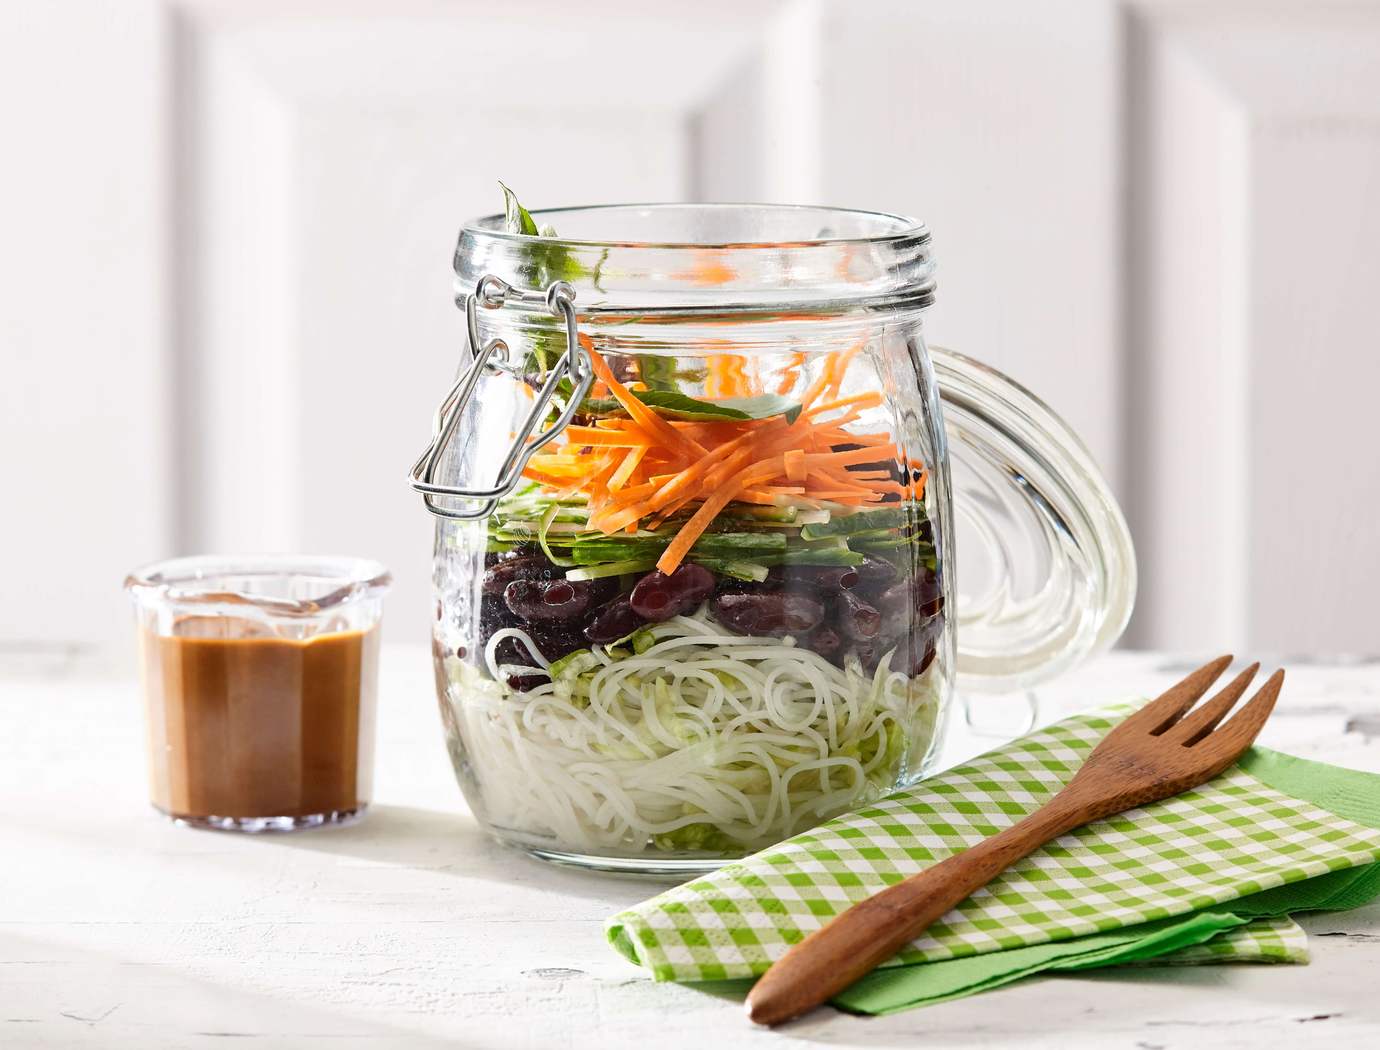 Vietnamese noodle salad with red kidney beans